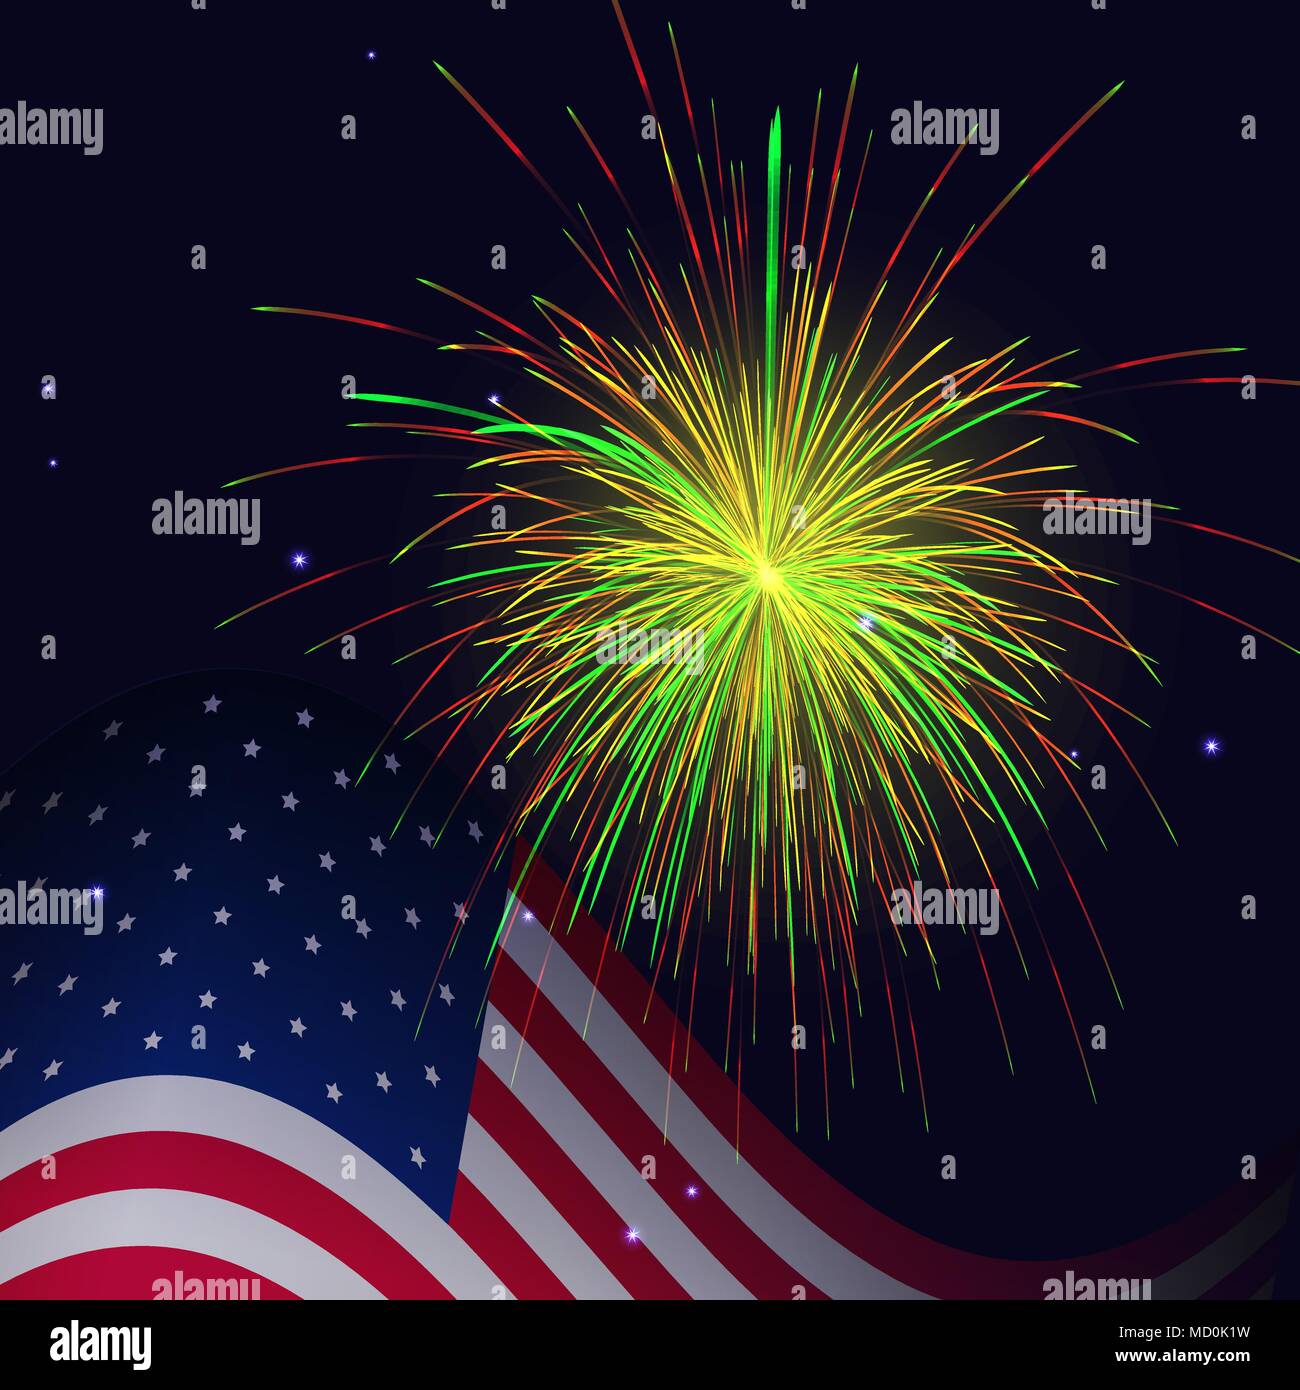 United States flag and celebration golden red green fireworks vector background. Independence Day, 4th of July holidays salute greeting card. Stock Vector